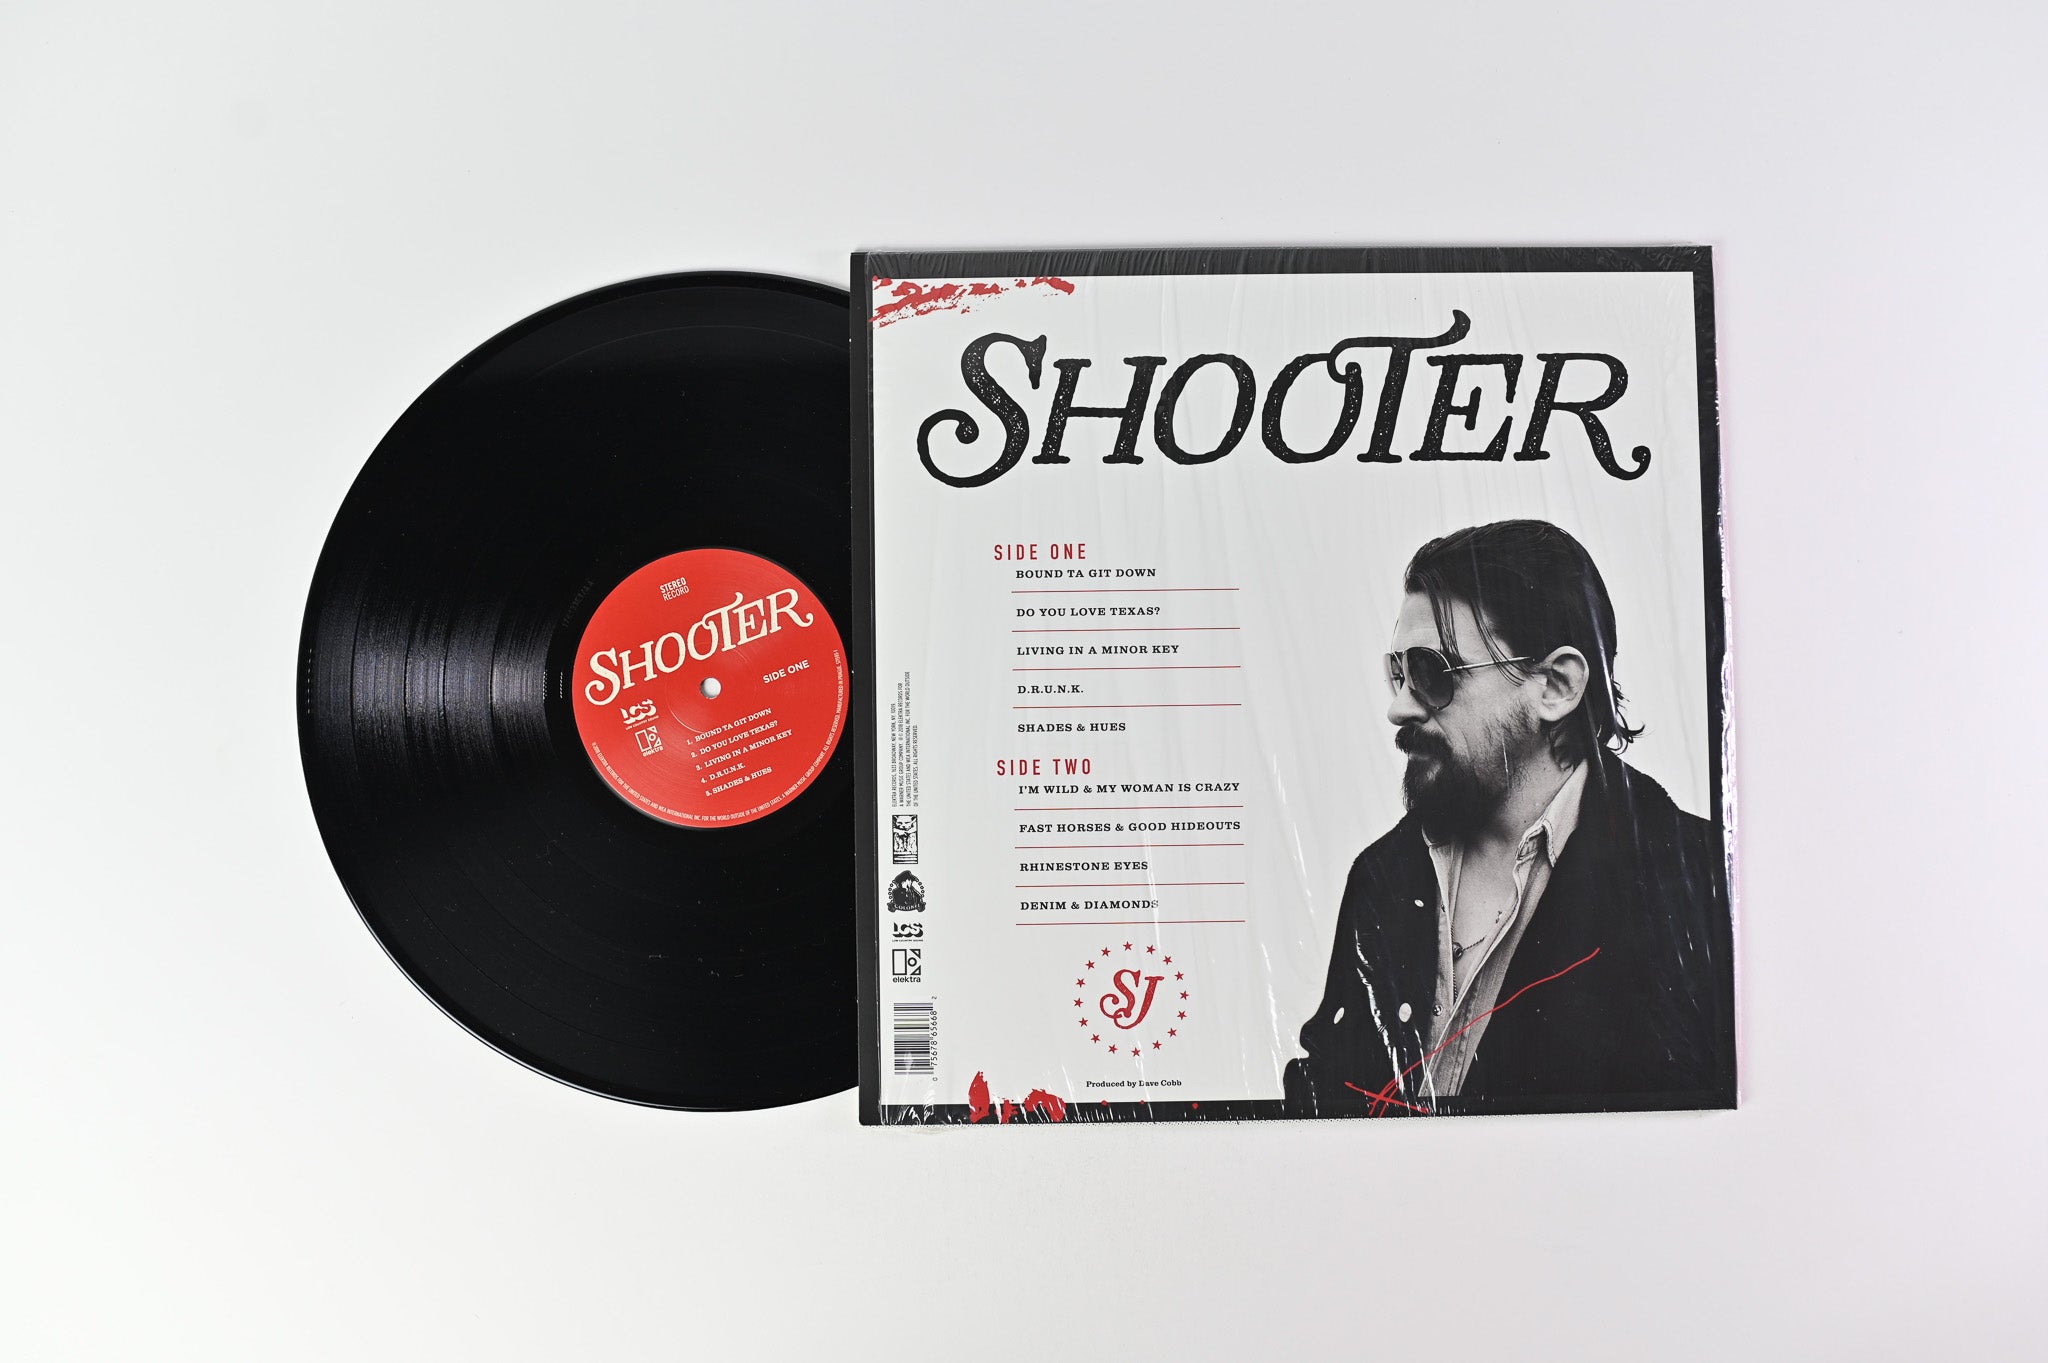 Shooter Jennings - Shooter on Low Country Sound